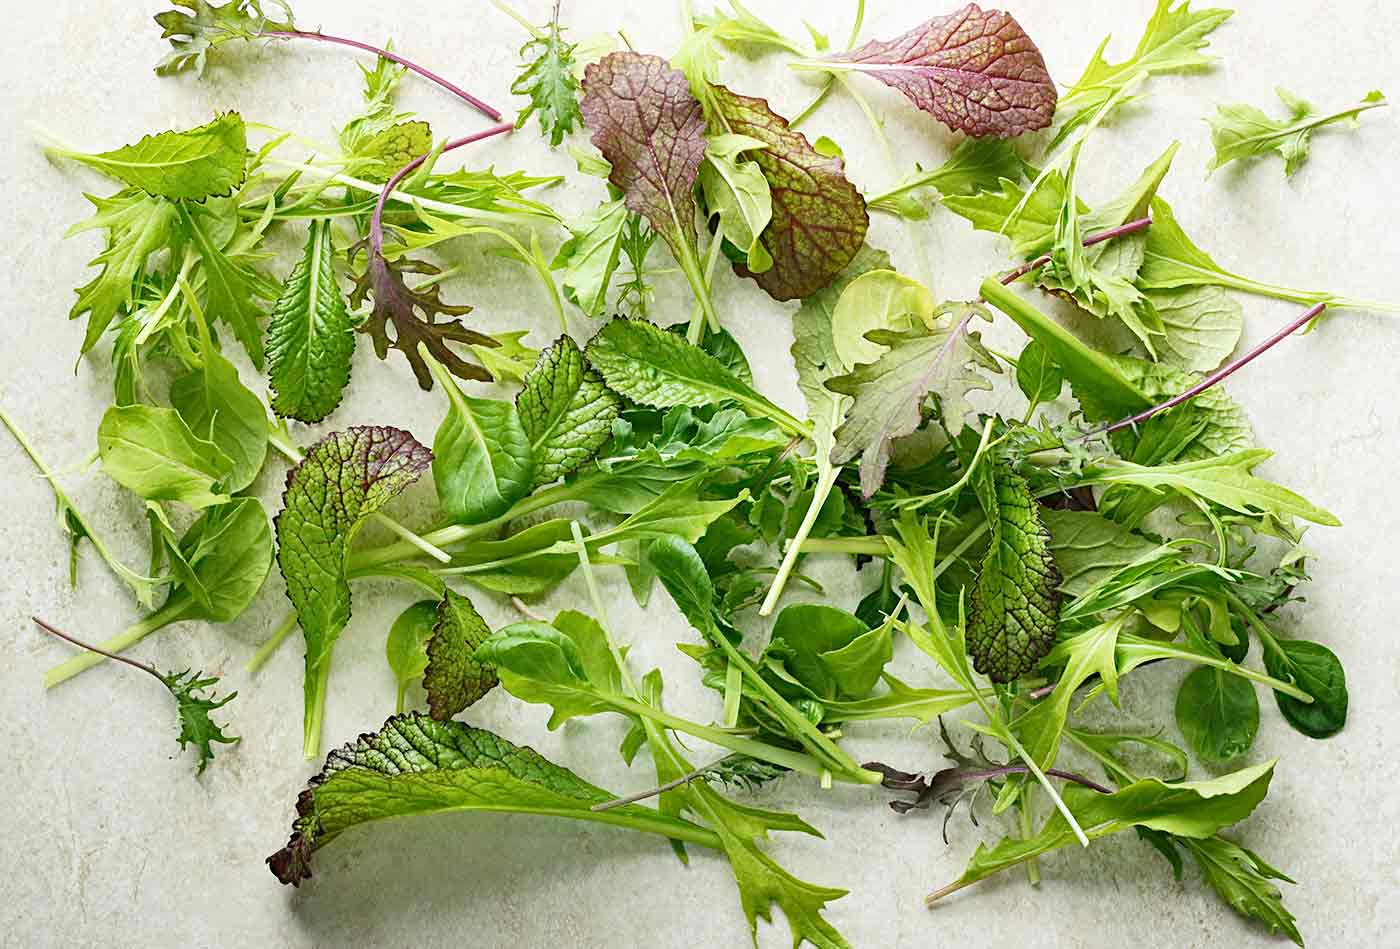 Spring baby greens mix